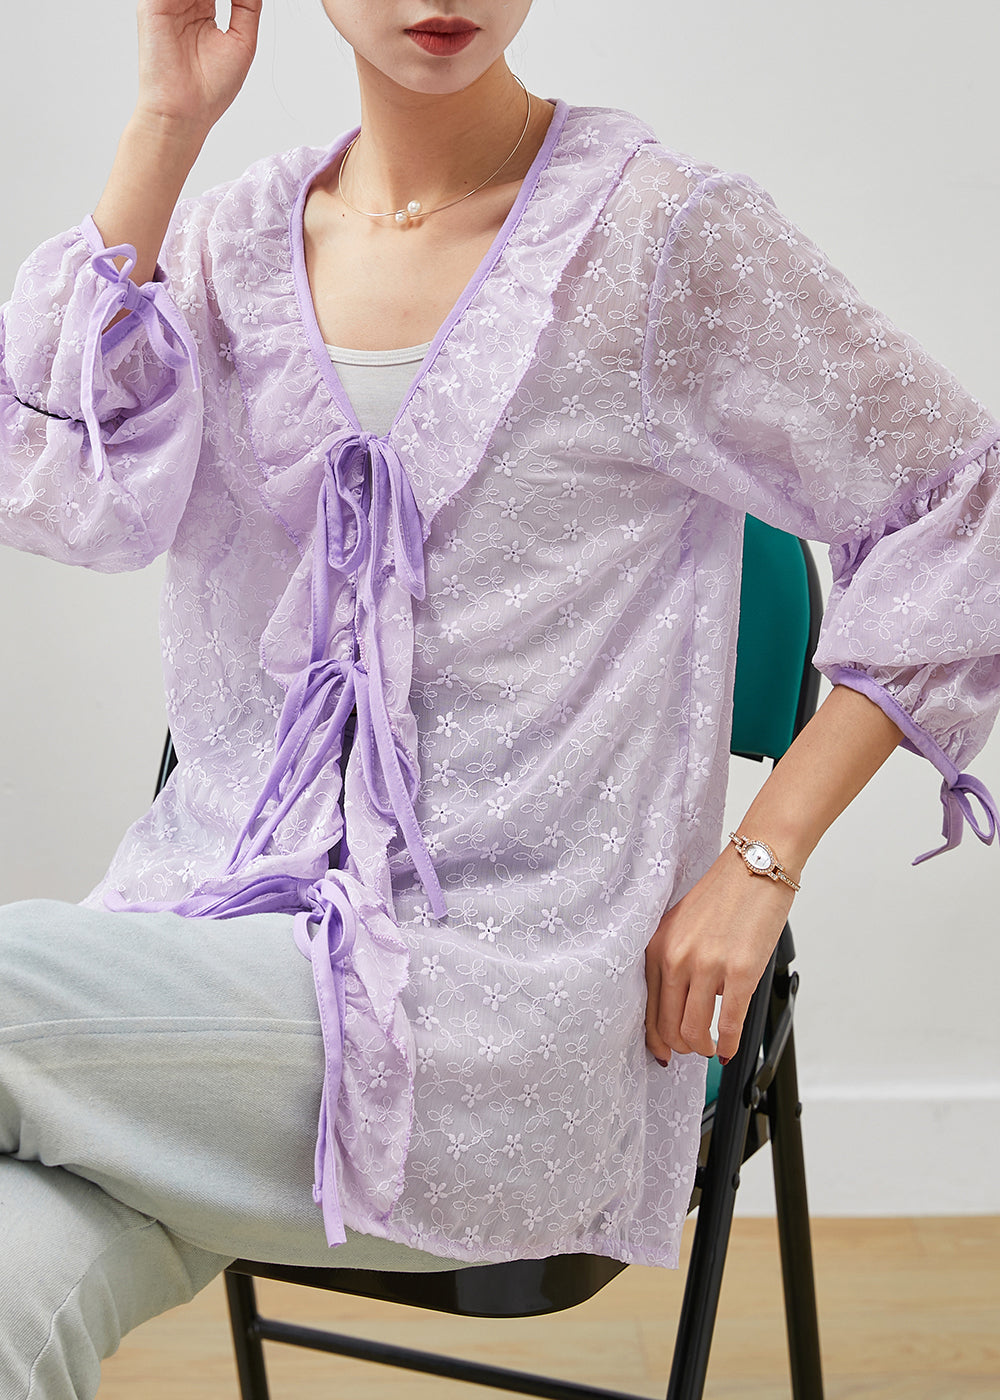 Purple Lace Shirt Tops Embroidered Ruffles Spring